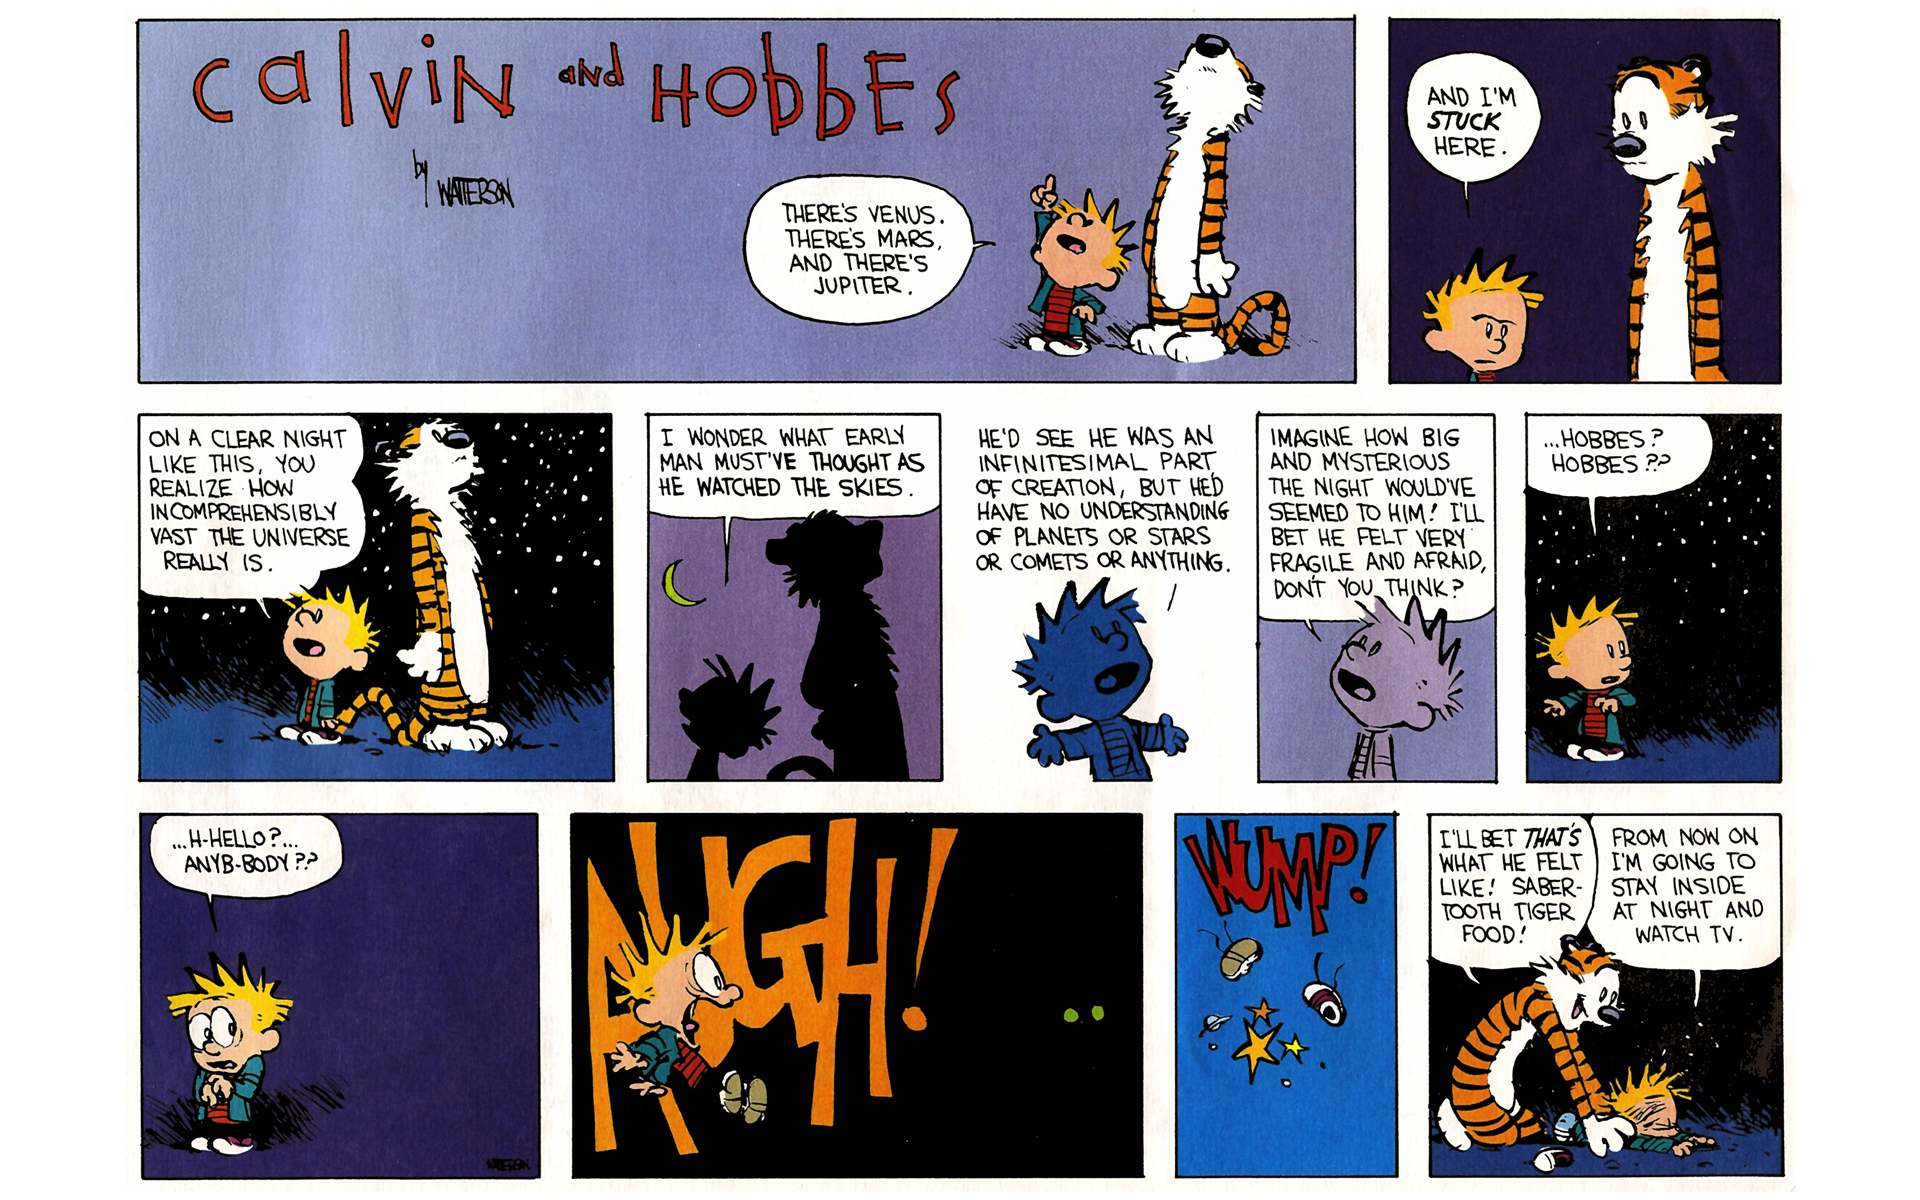 Calvin And Hobbes Issue 8 | Read Calvin And Hobbes Issue 8 comic online in  high quality. Read Full Comic online for free - Read comics online in high  quality .|viewcomiconline.com